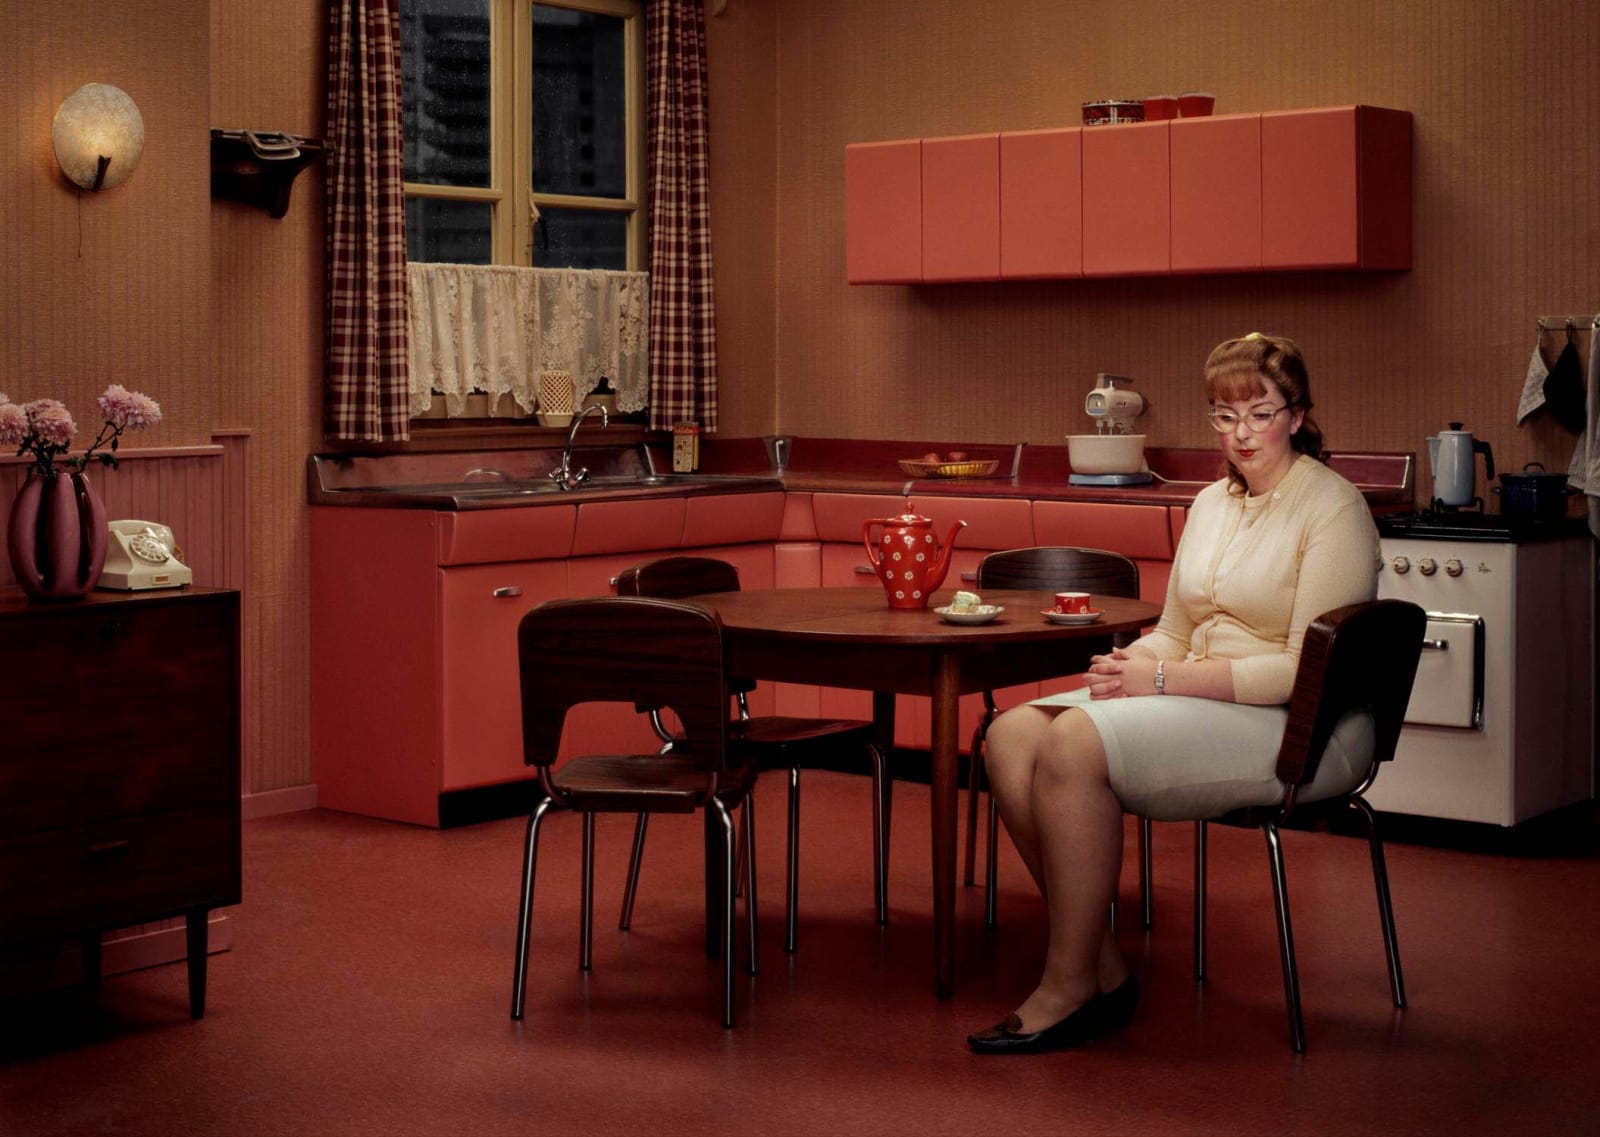 Erwin Olaf woman sitting in red midcentury kitchen with cake and tea on table